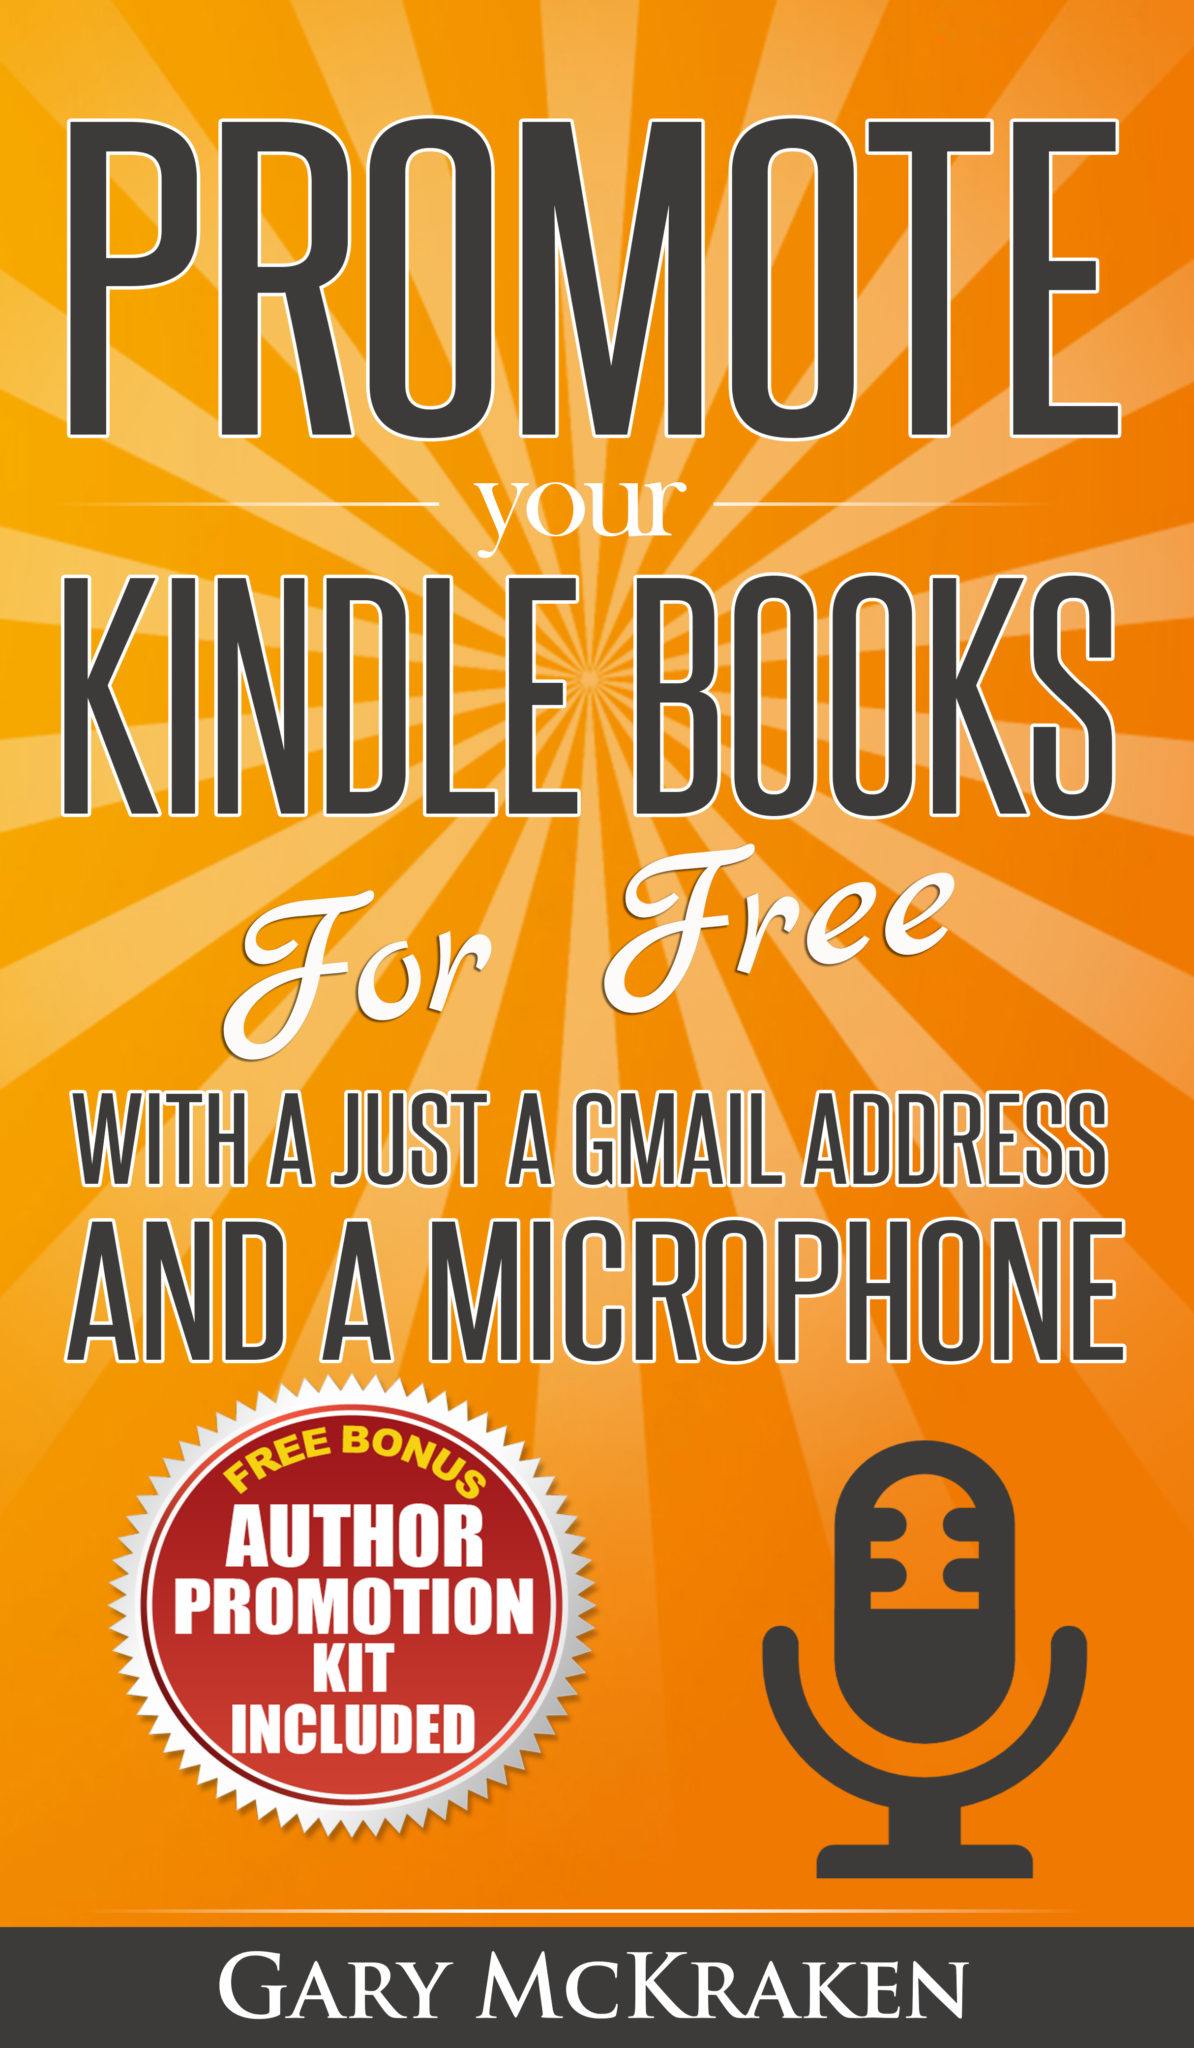 FREE: Promote Your Kindle Books For Free With a Just a Gmail Address and a Microphone by Gary McKraken